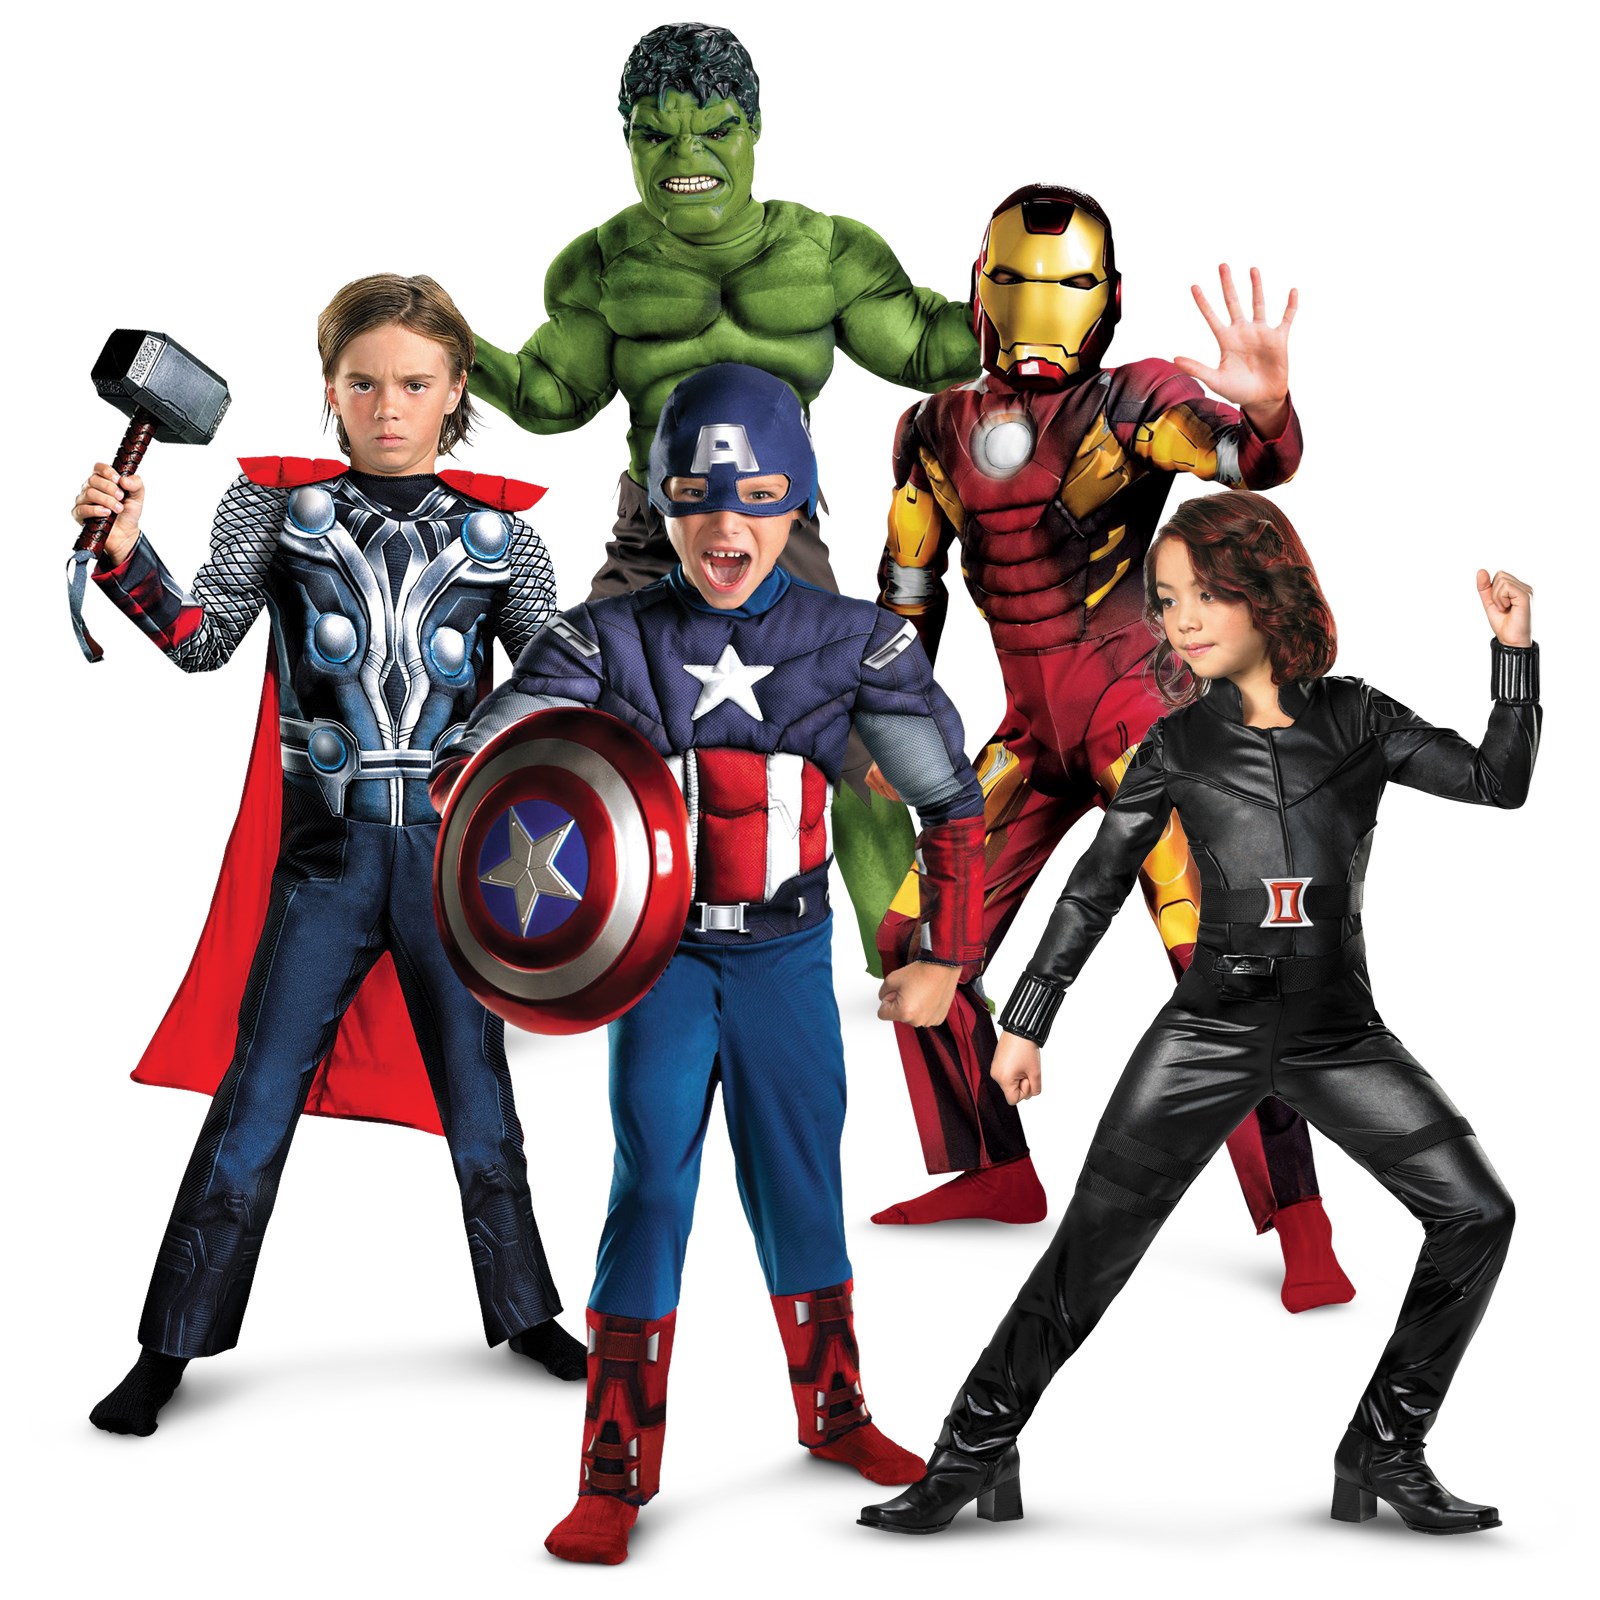 The Avengers Group Costumes